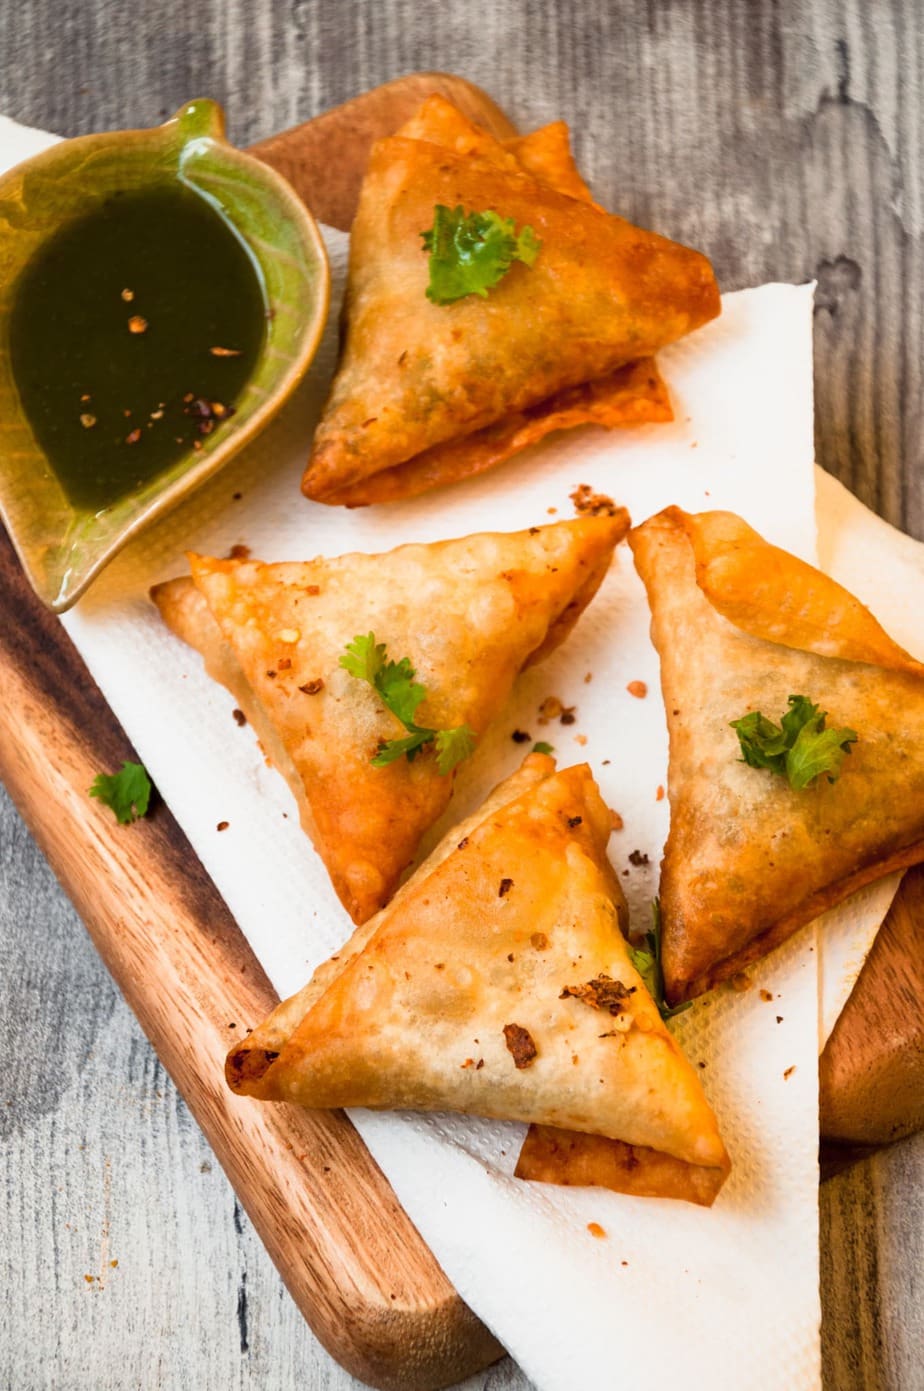 Four Samosa Triangles served in a wooden tray with green sauce on the side.